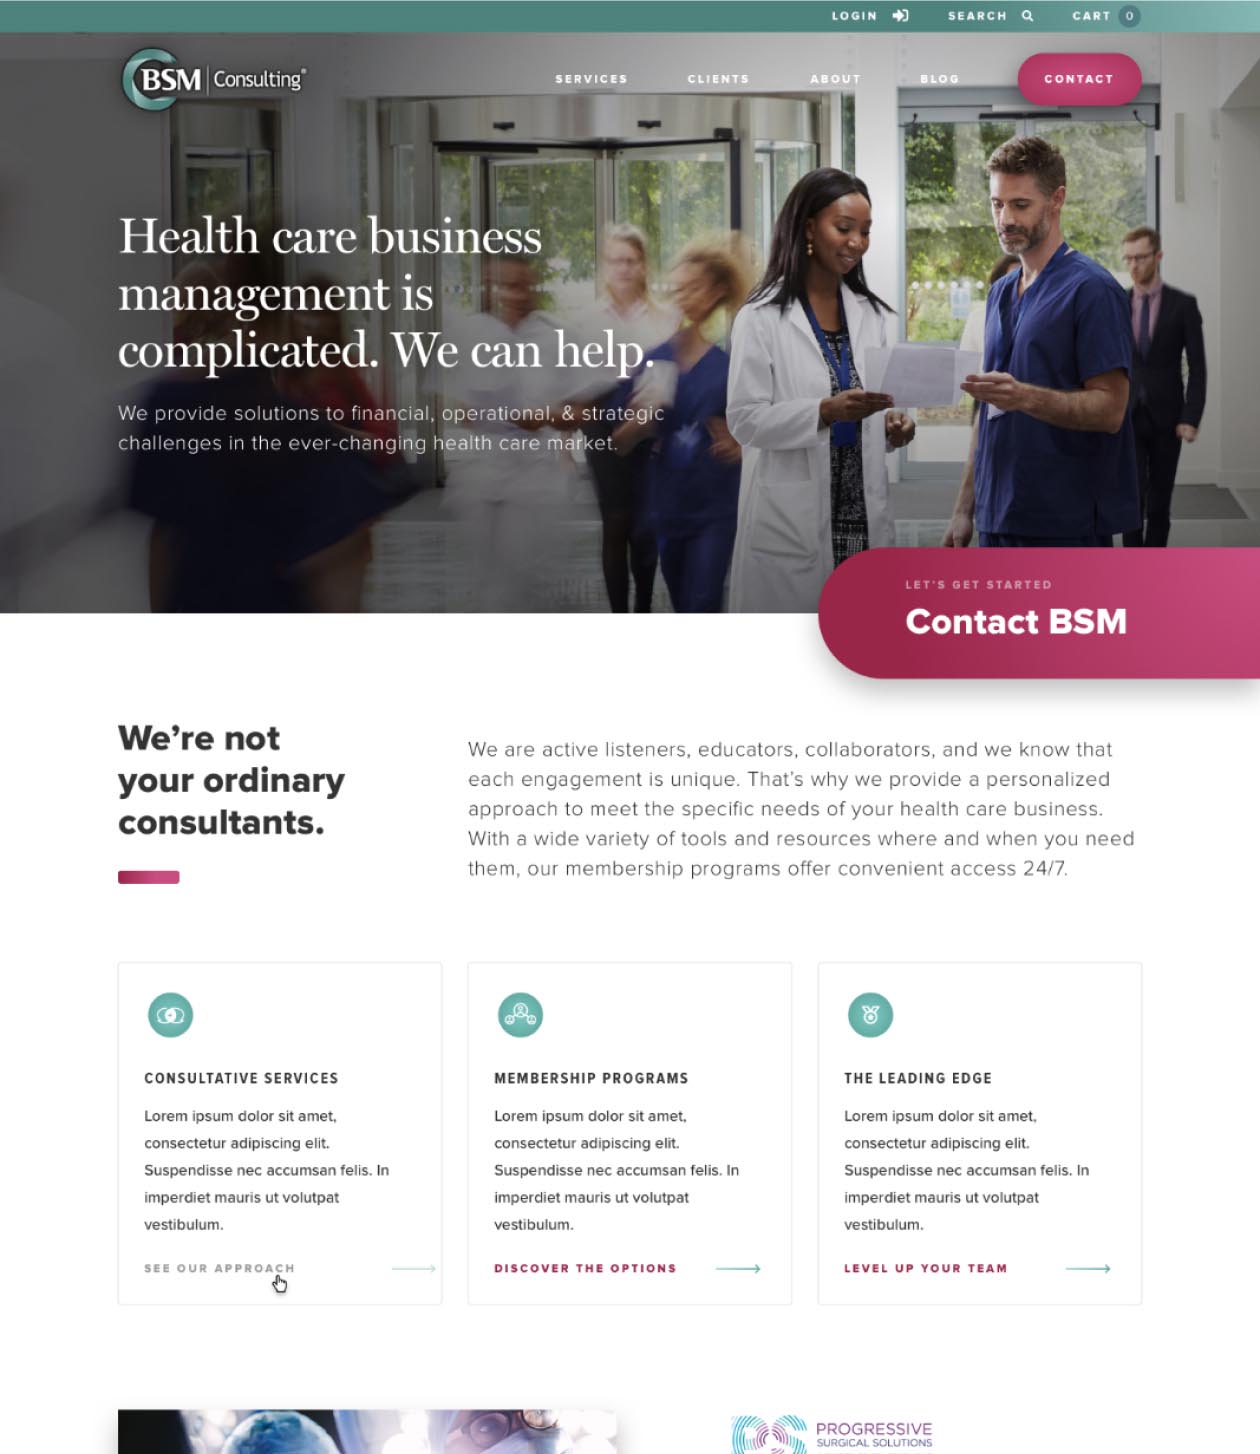 bsmconsulting-webdesign-casestudy-9